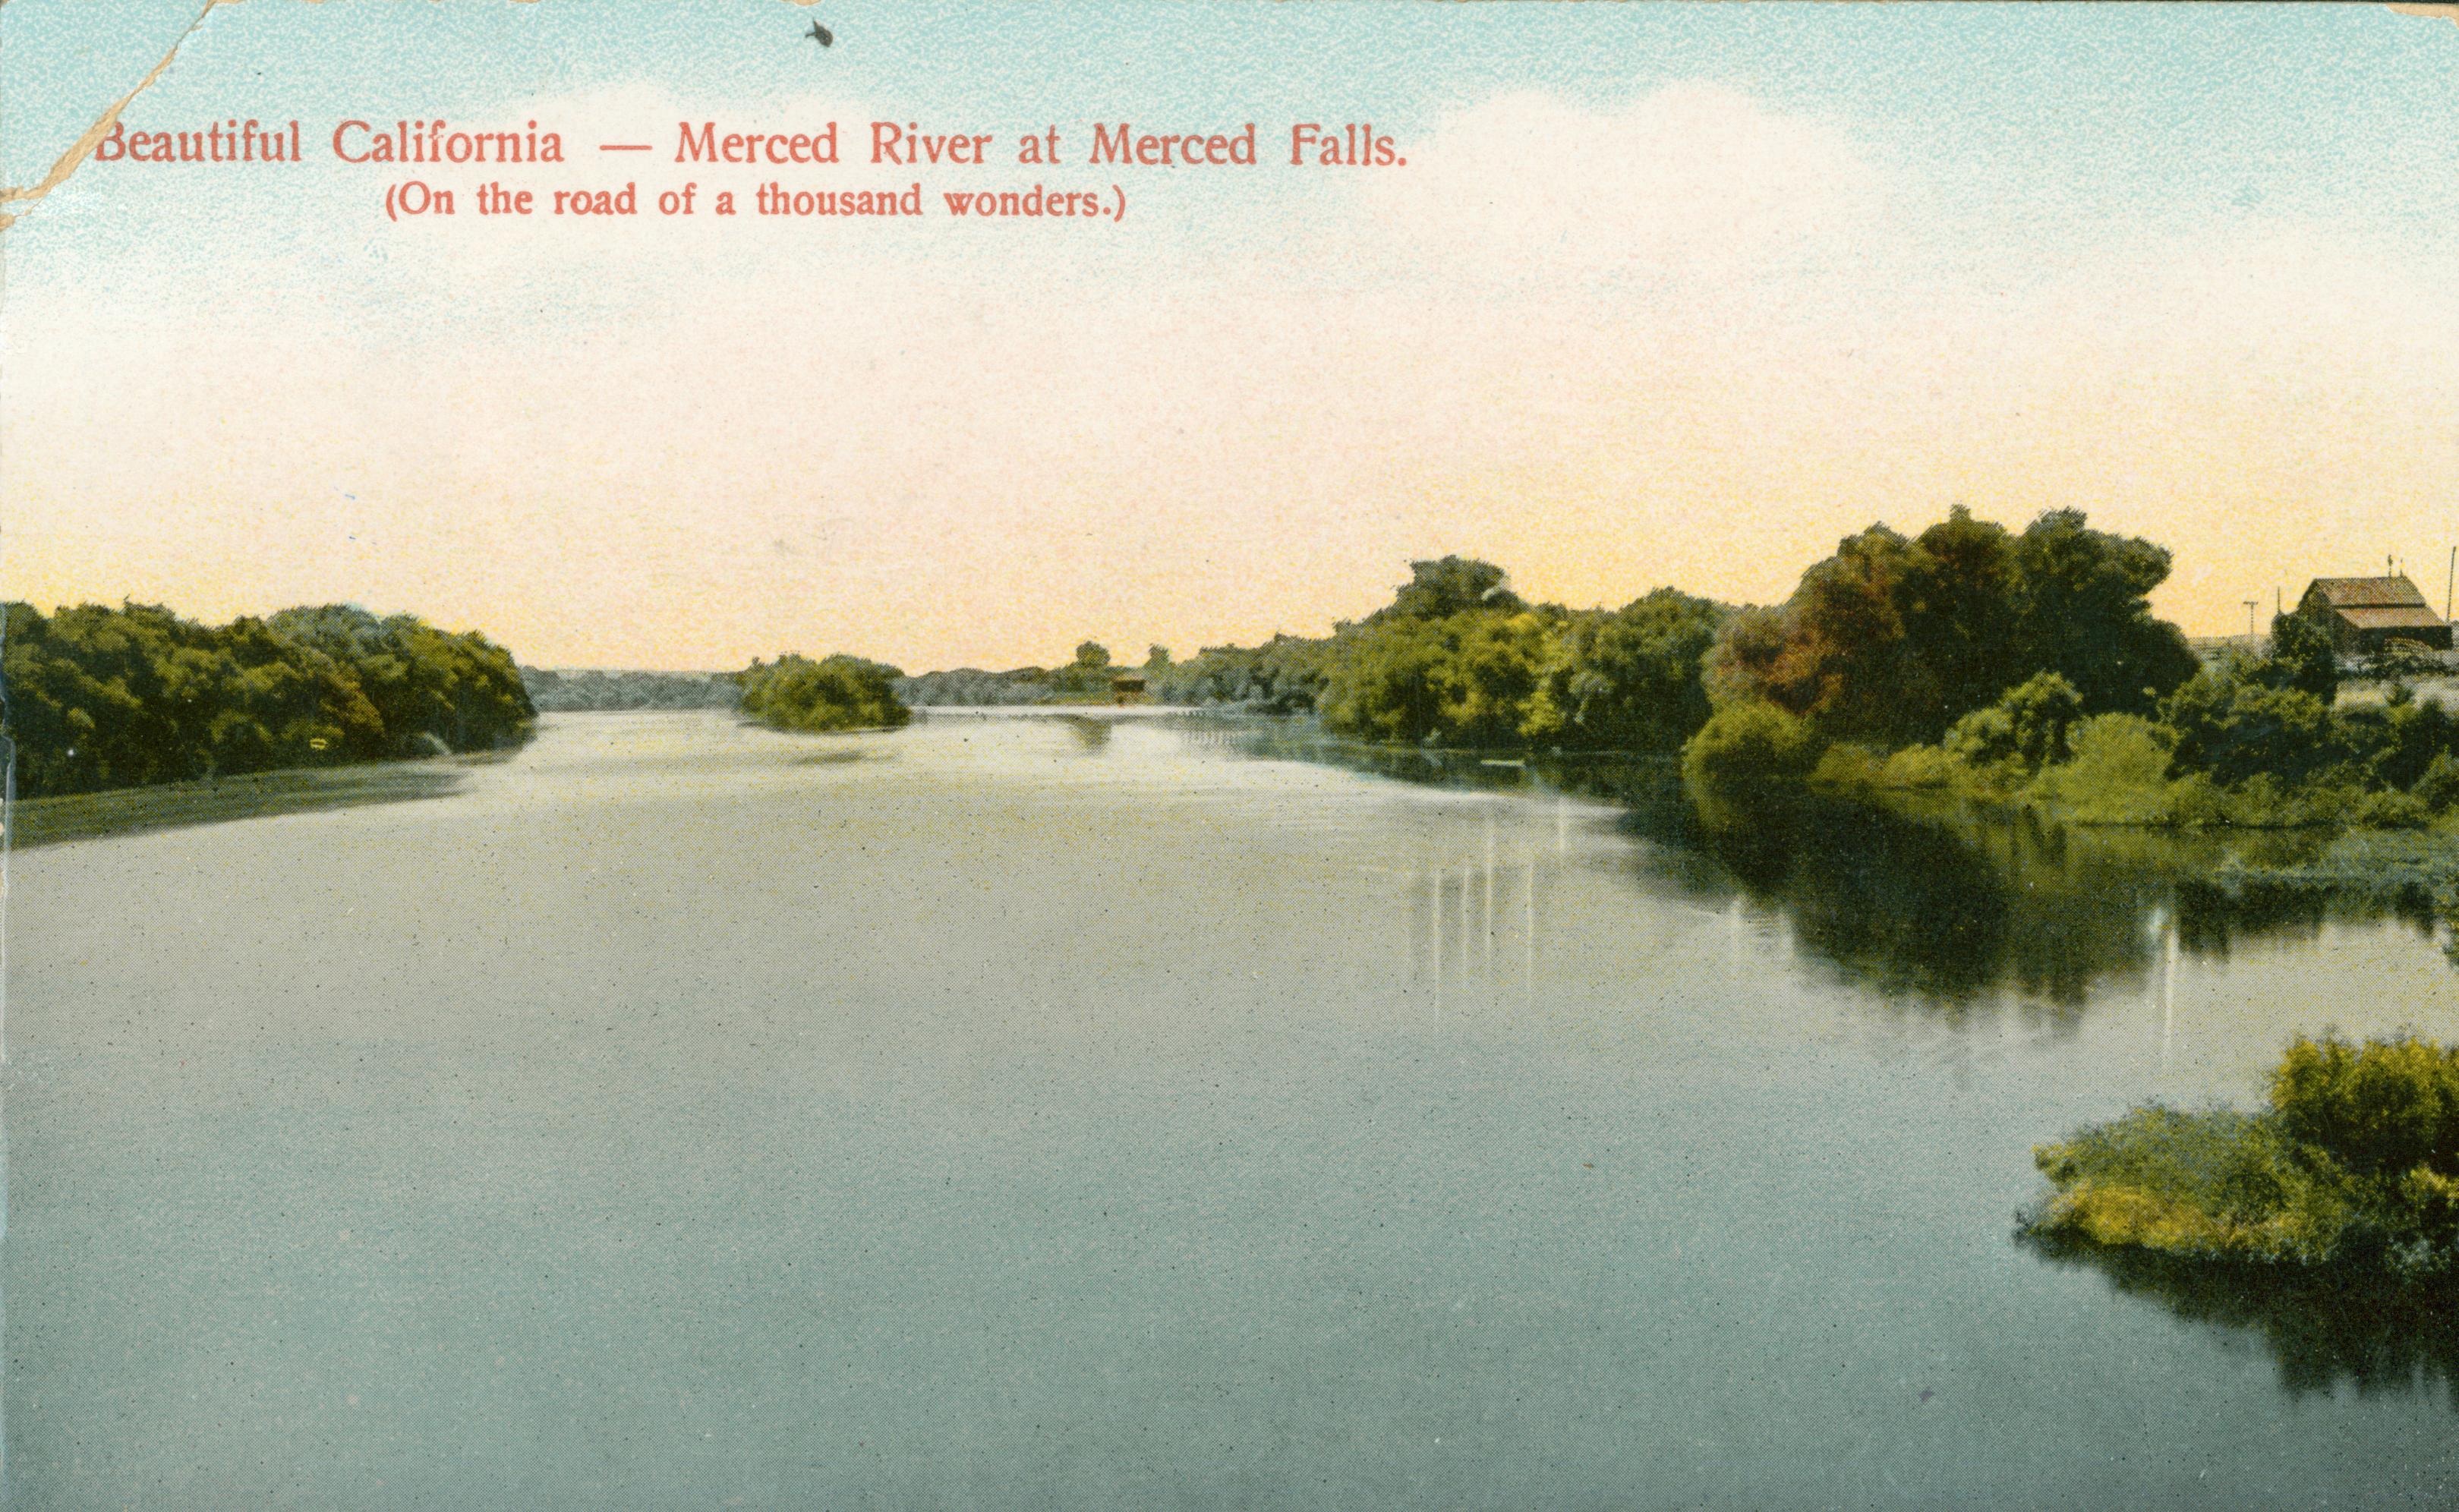 This postcard shows a tree-lined river, with a barn off to the far right.